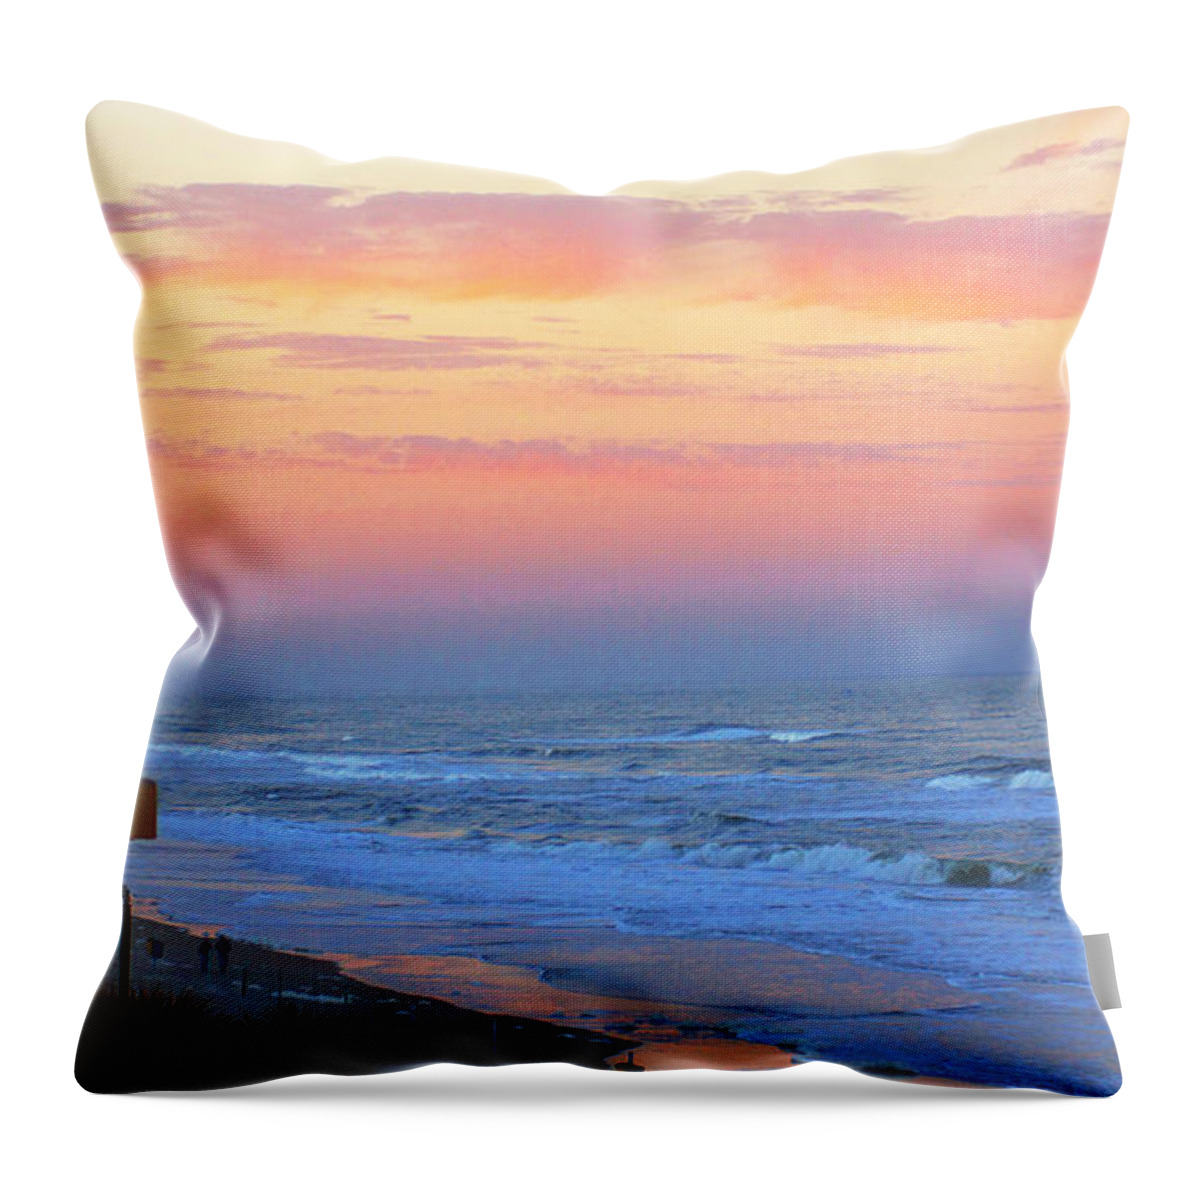 Sunset Throw Pillow featuring the photograph Sunset On The Beach by CHAZ Daugherty